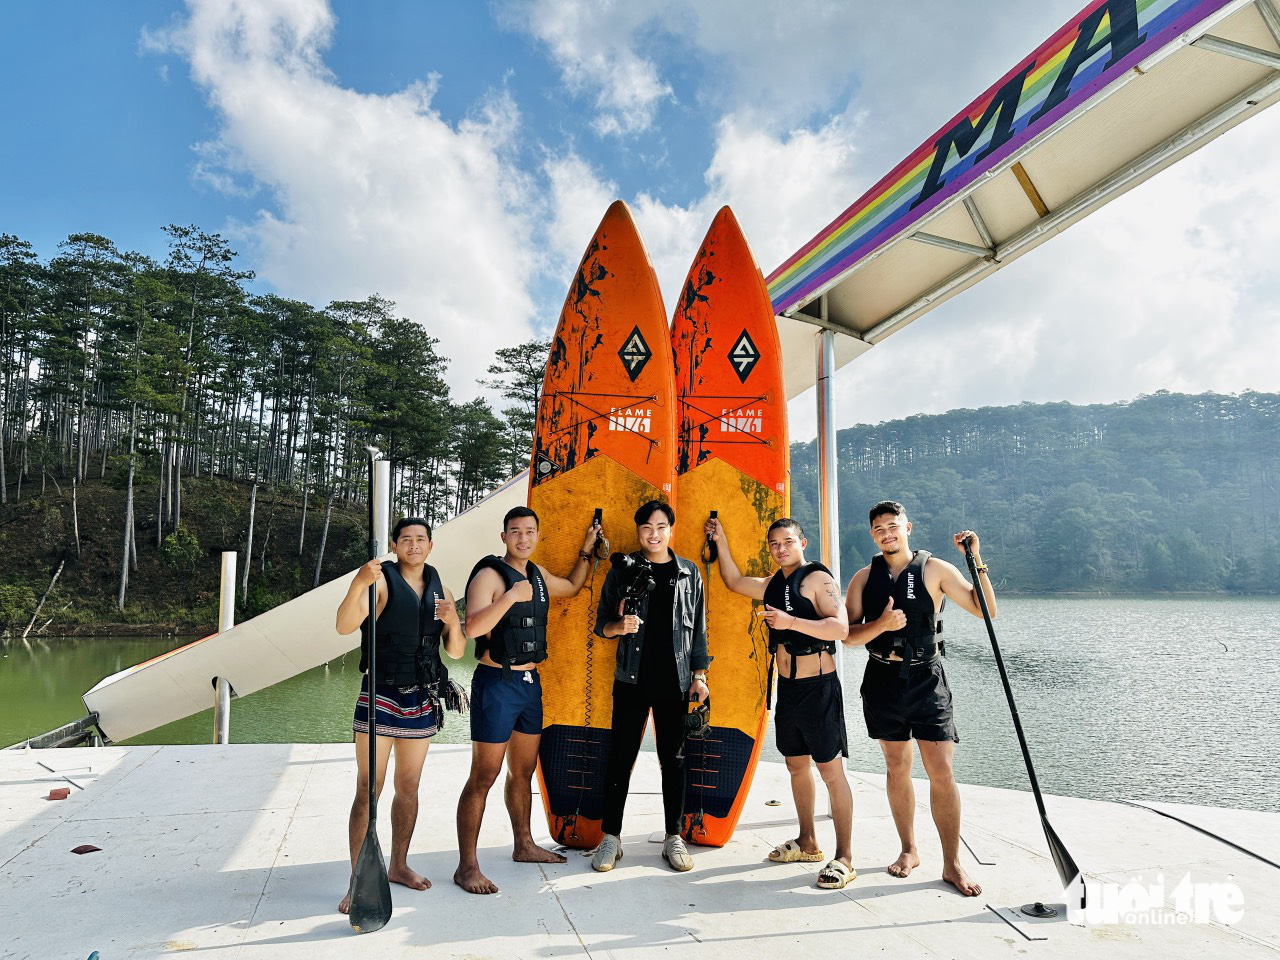 Tourism products in association with sports, which are highlights of Da Lat, have been developed in Lac Duong thanks to the availability of land. Photo: The Kiet / Tuoi Tre